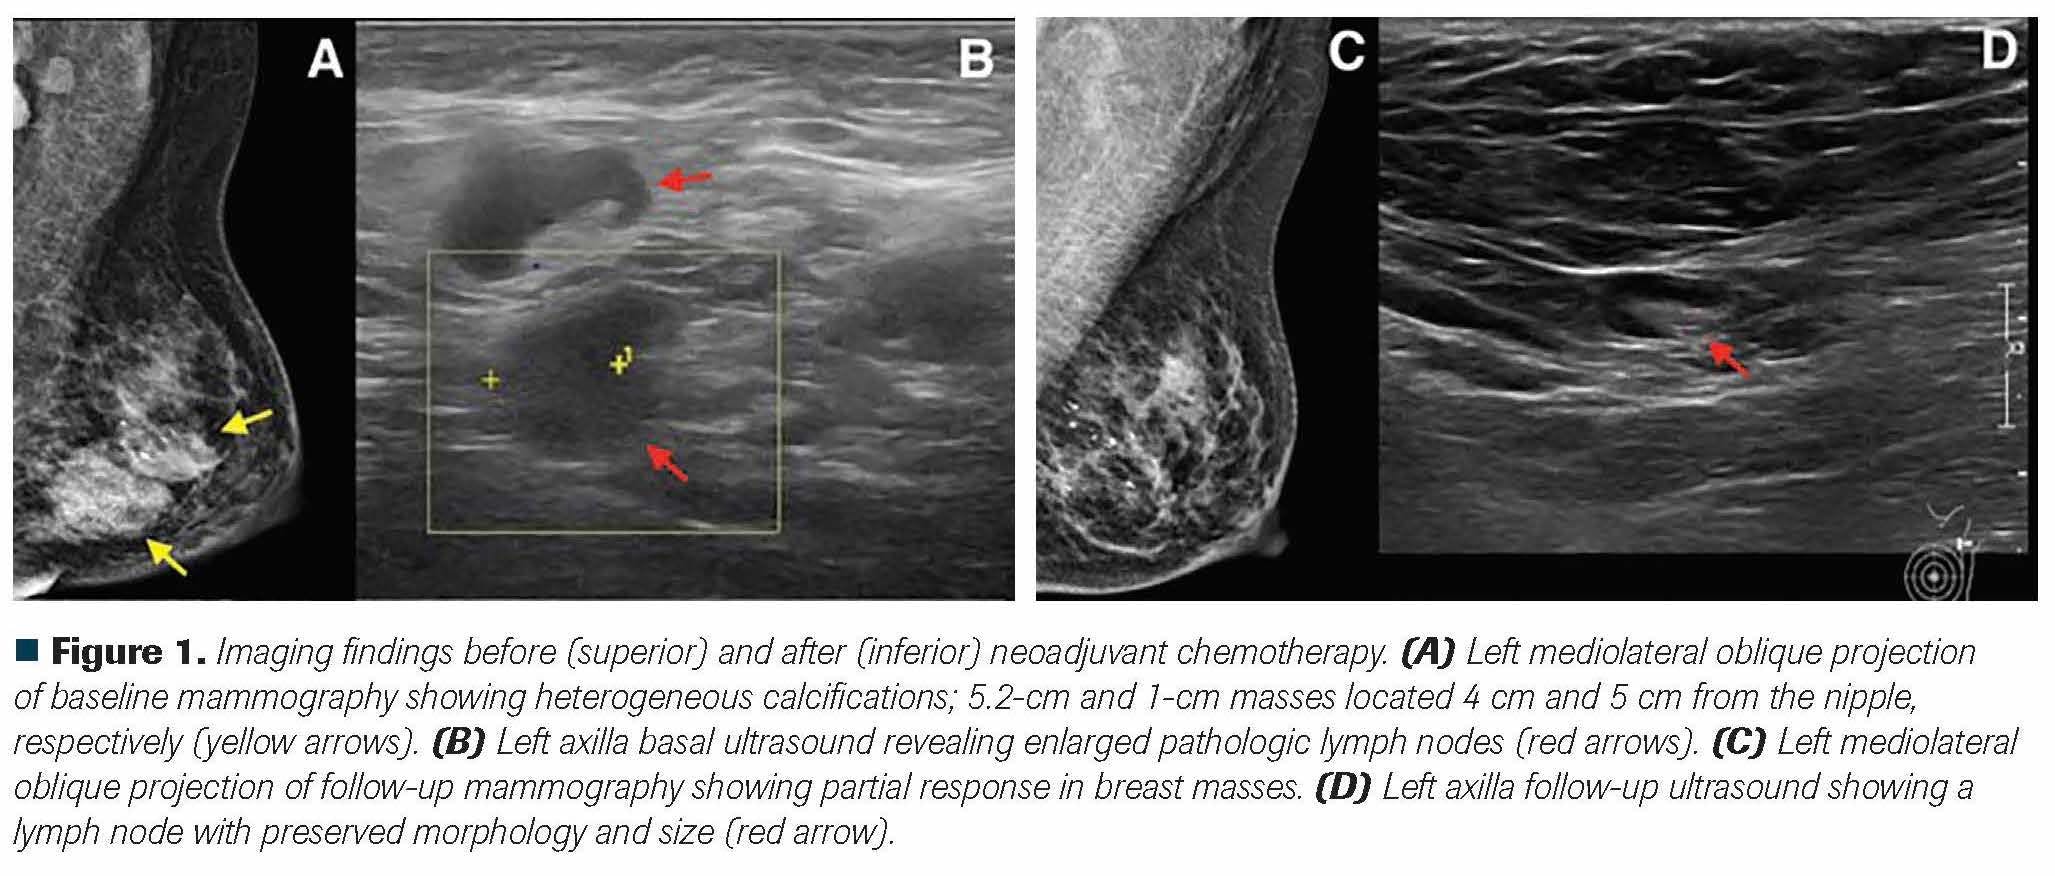 The Role of Postmastectomy Radiotherapy in Locally Advanced Breast Cancer After Pathological Complete Response to Neoadjuvant Chemotherapy